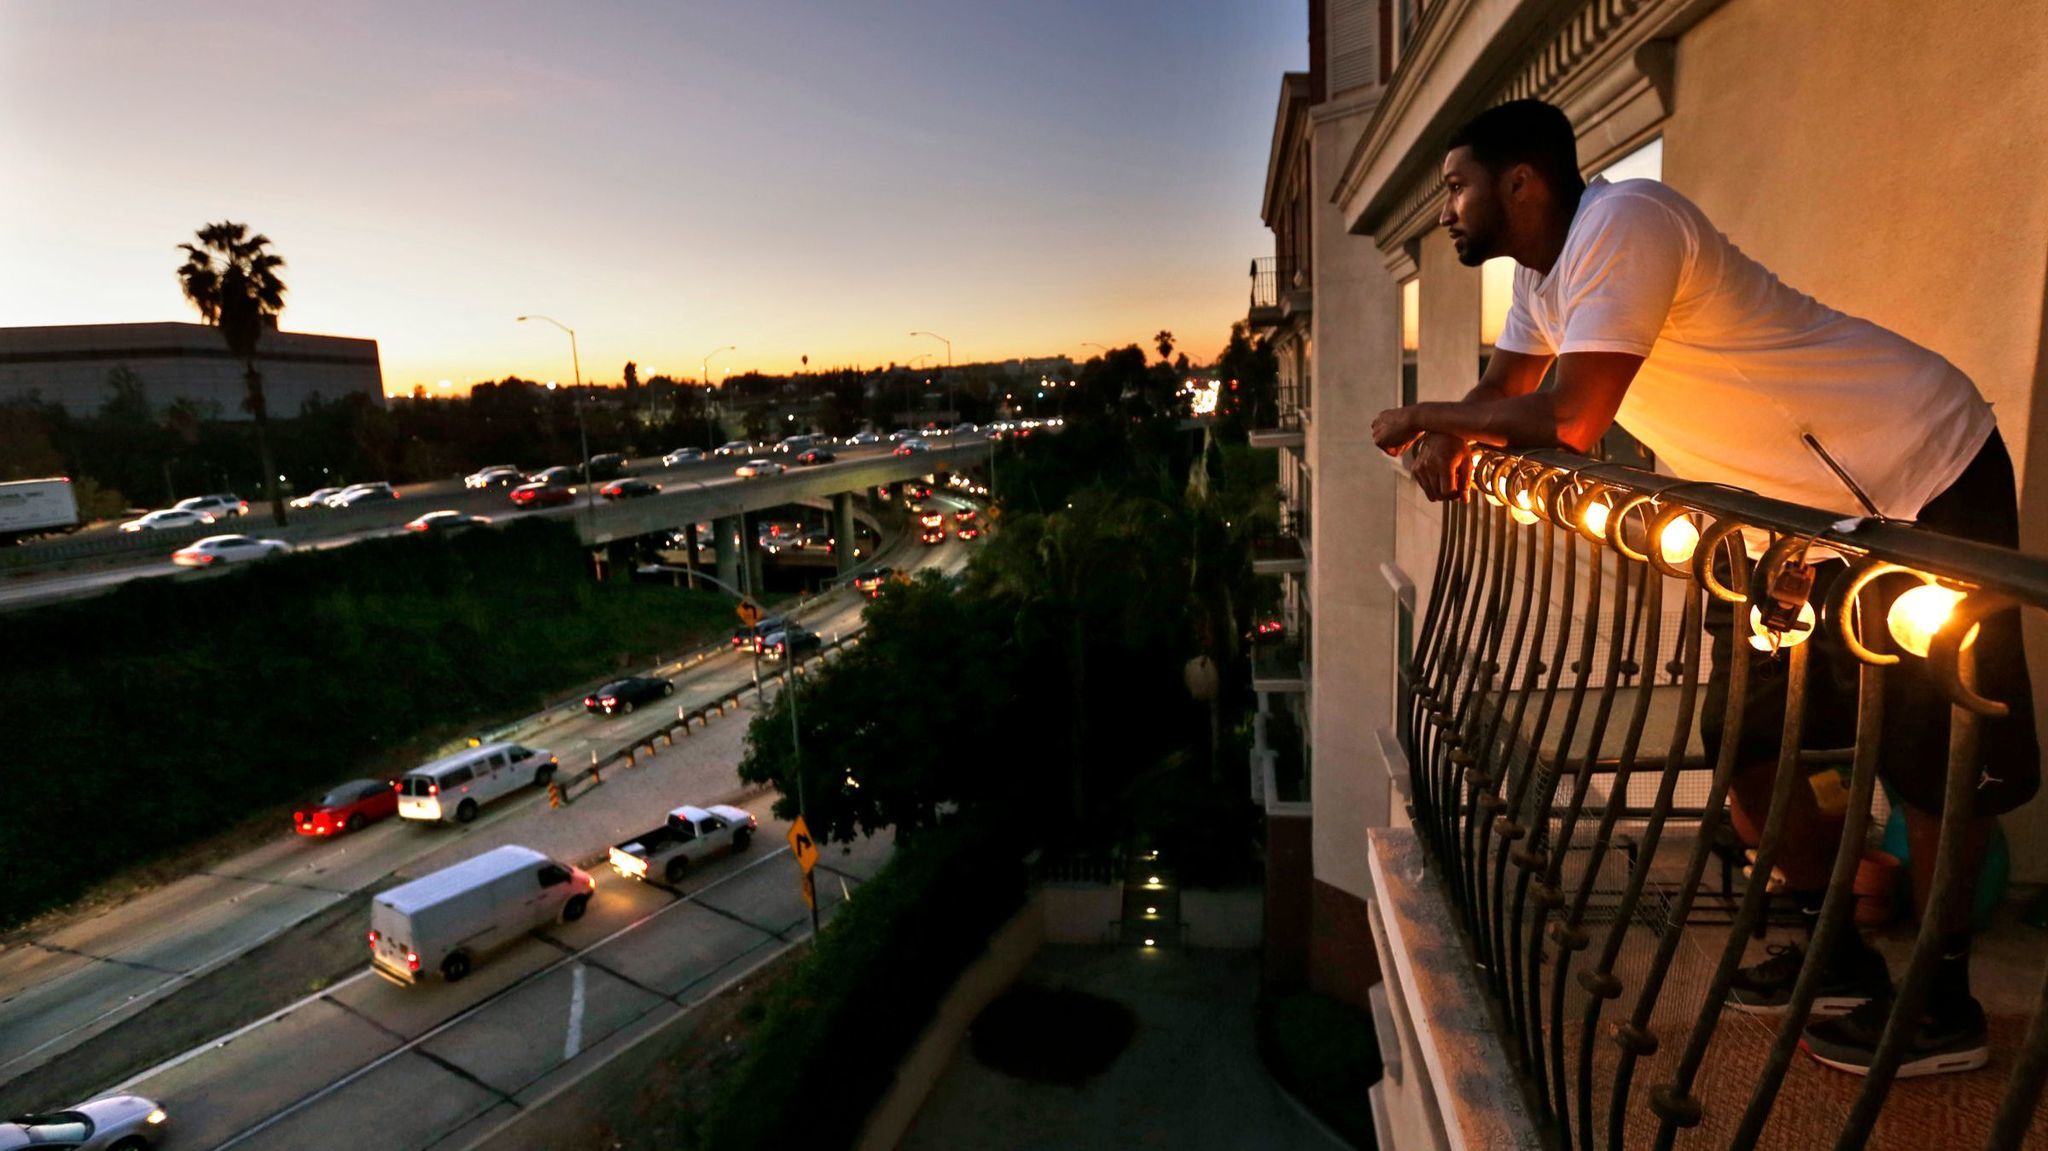 NOVEMBER 18, 2015. LOS ANGELES, CA. Everett Smith, 30, a renter at The Orsini apartments looks out